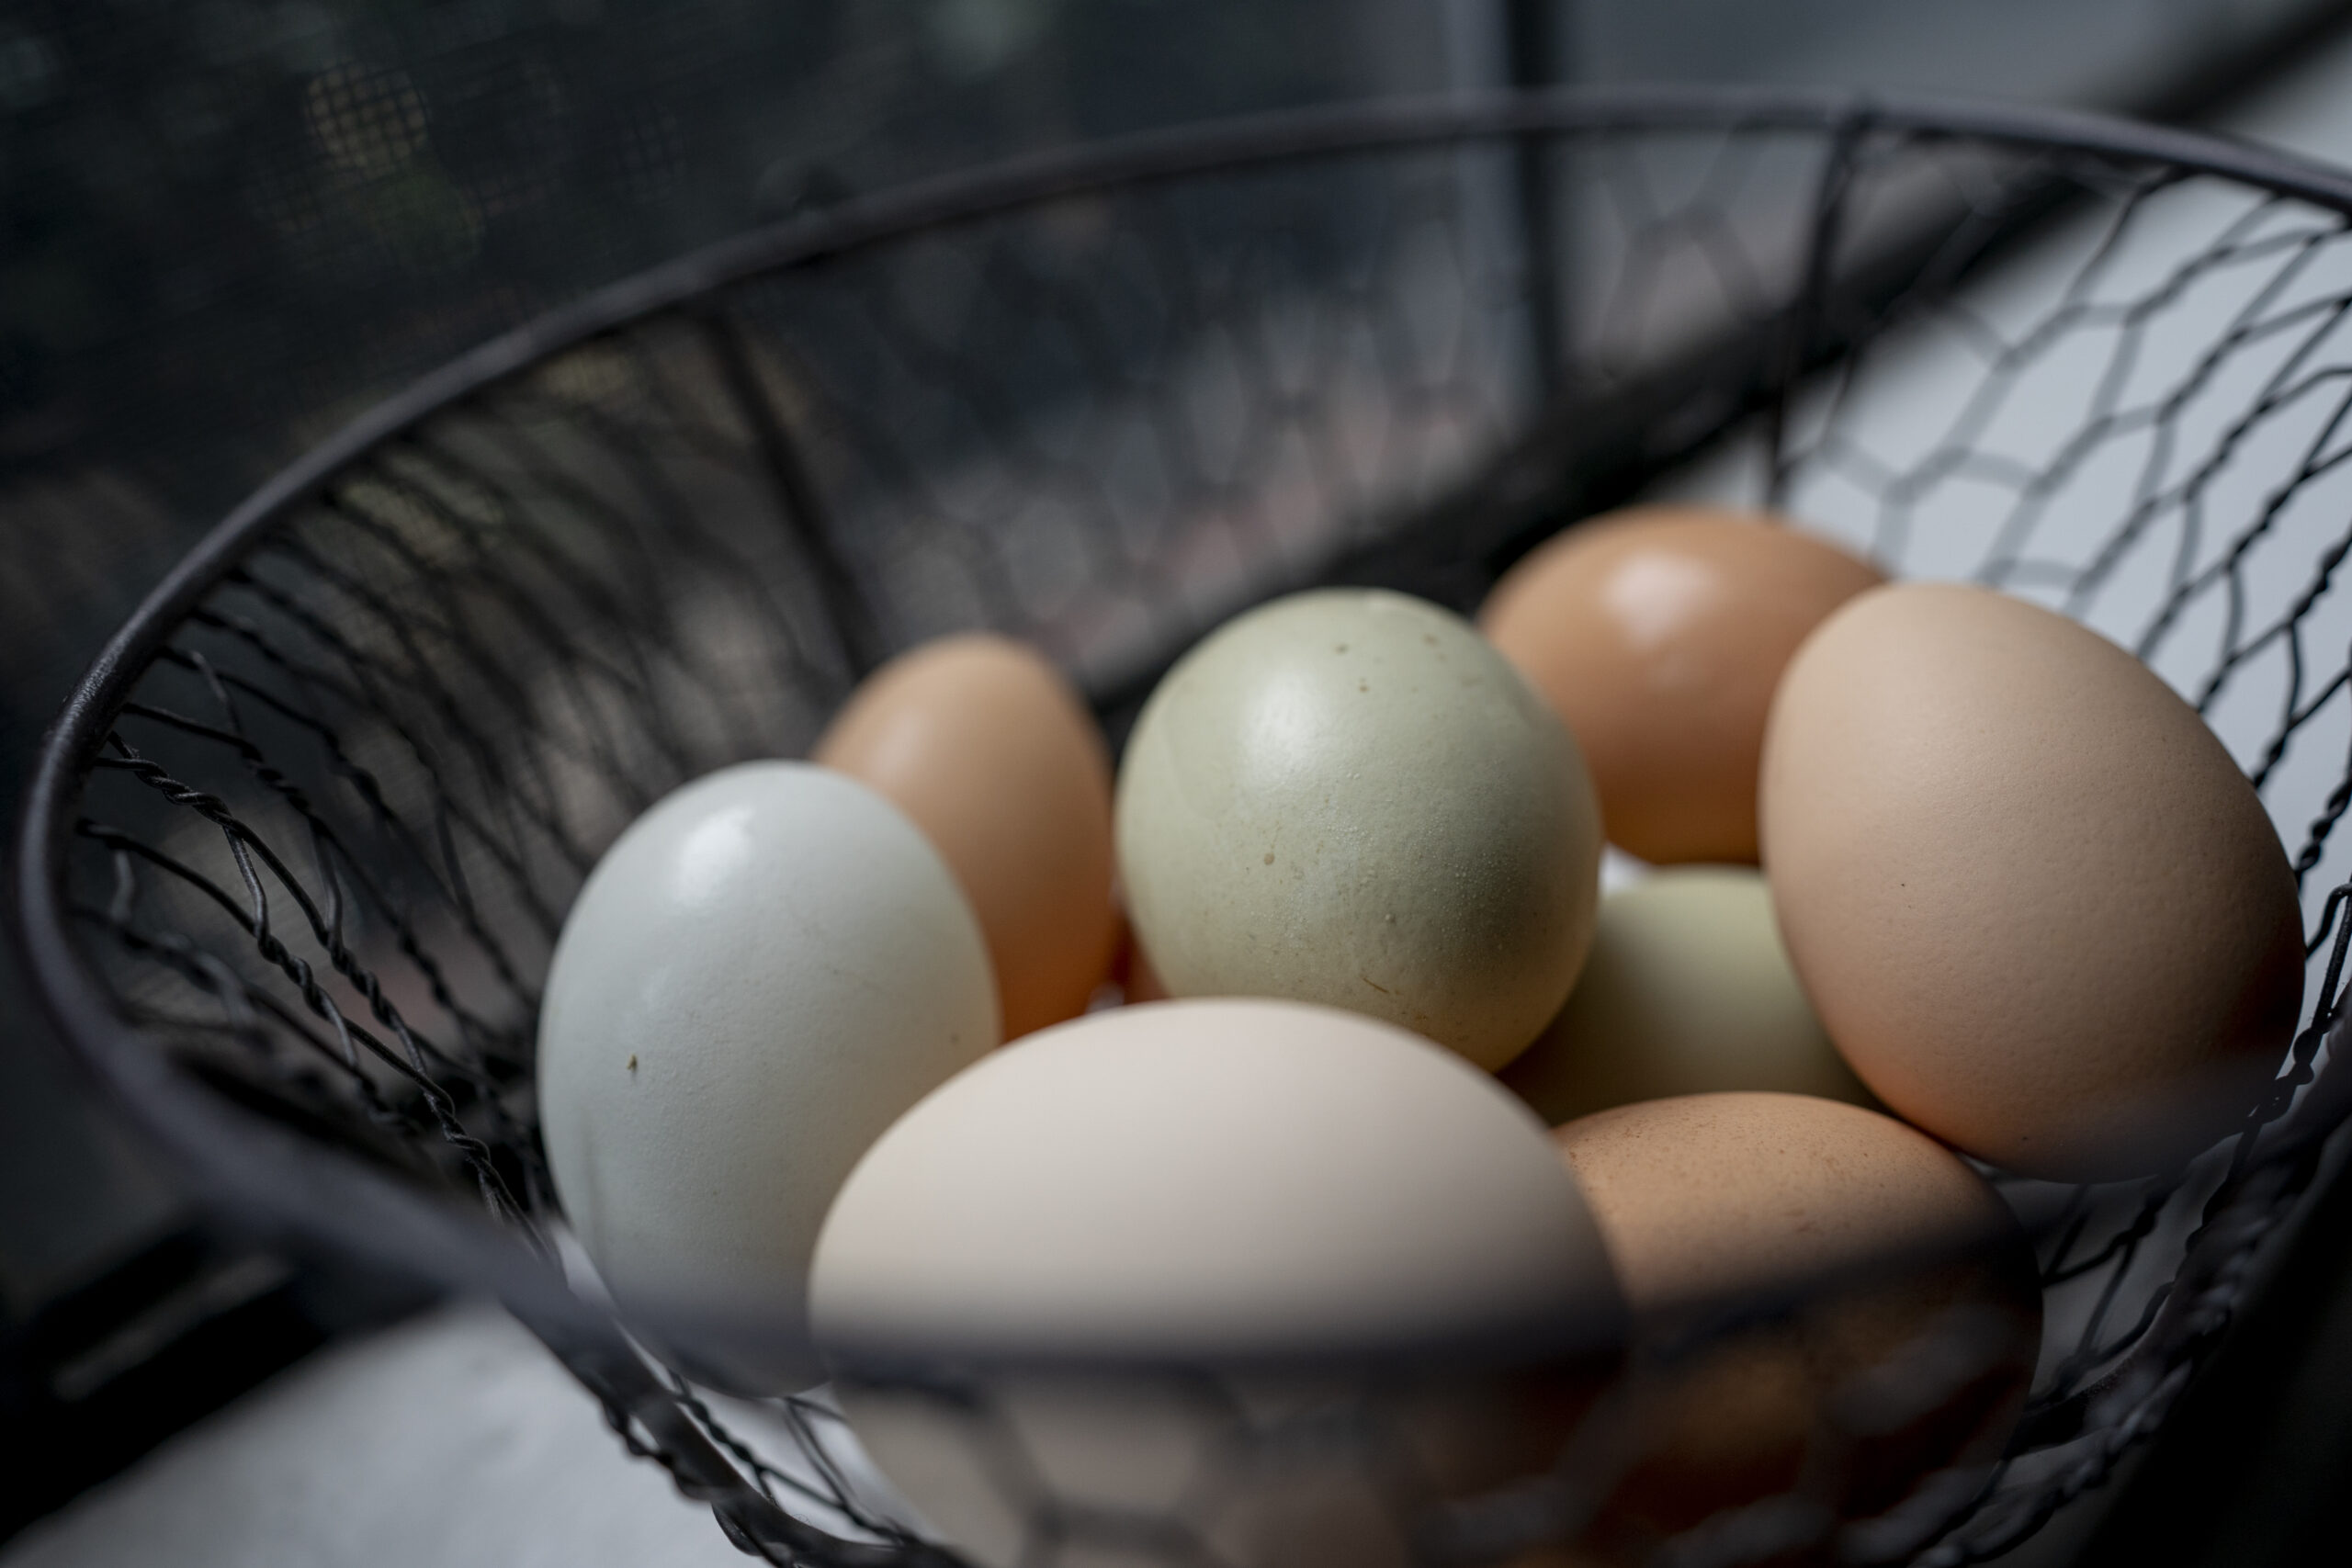 Chickens lay eggs of different colors primarily due to their genetics. (Laura McKenzie/Texas A&M AgriLife)